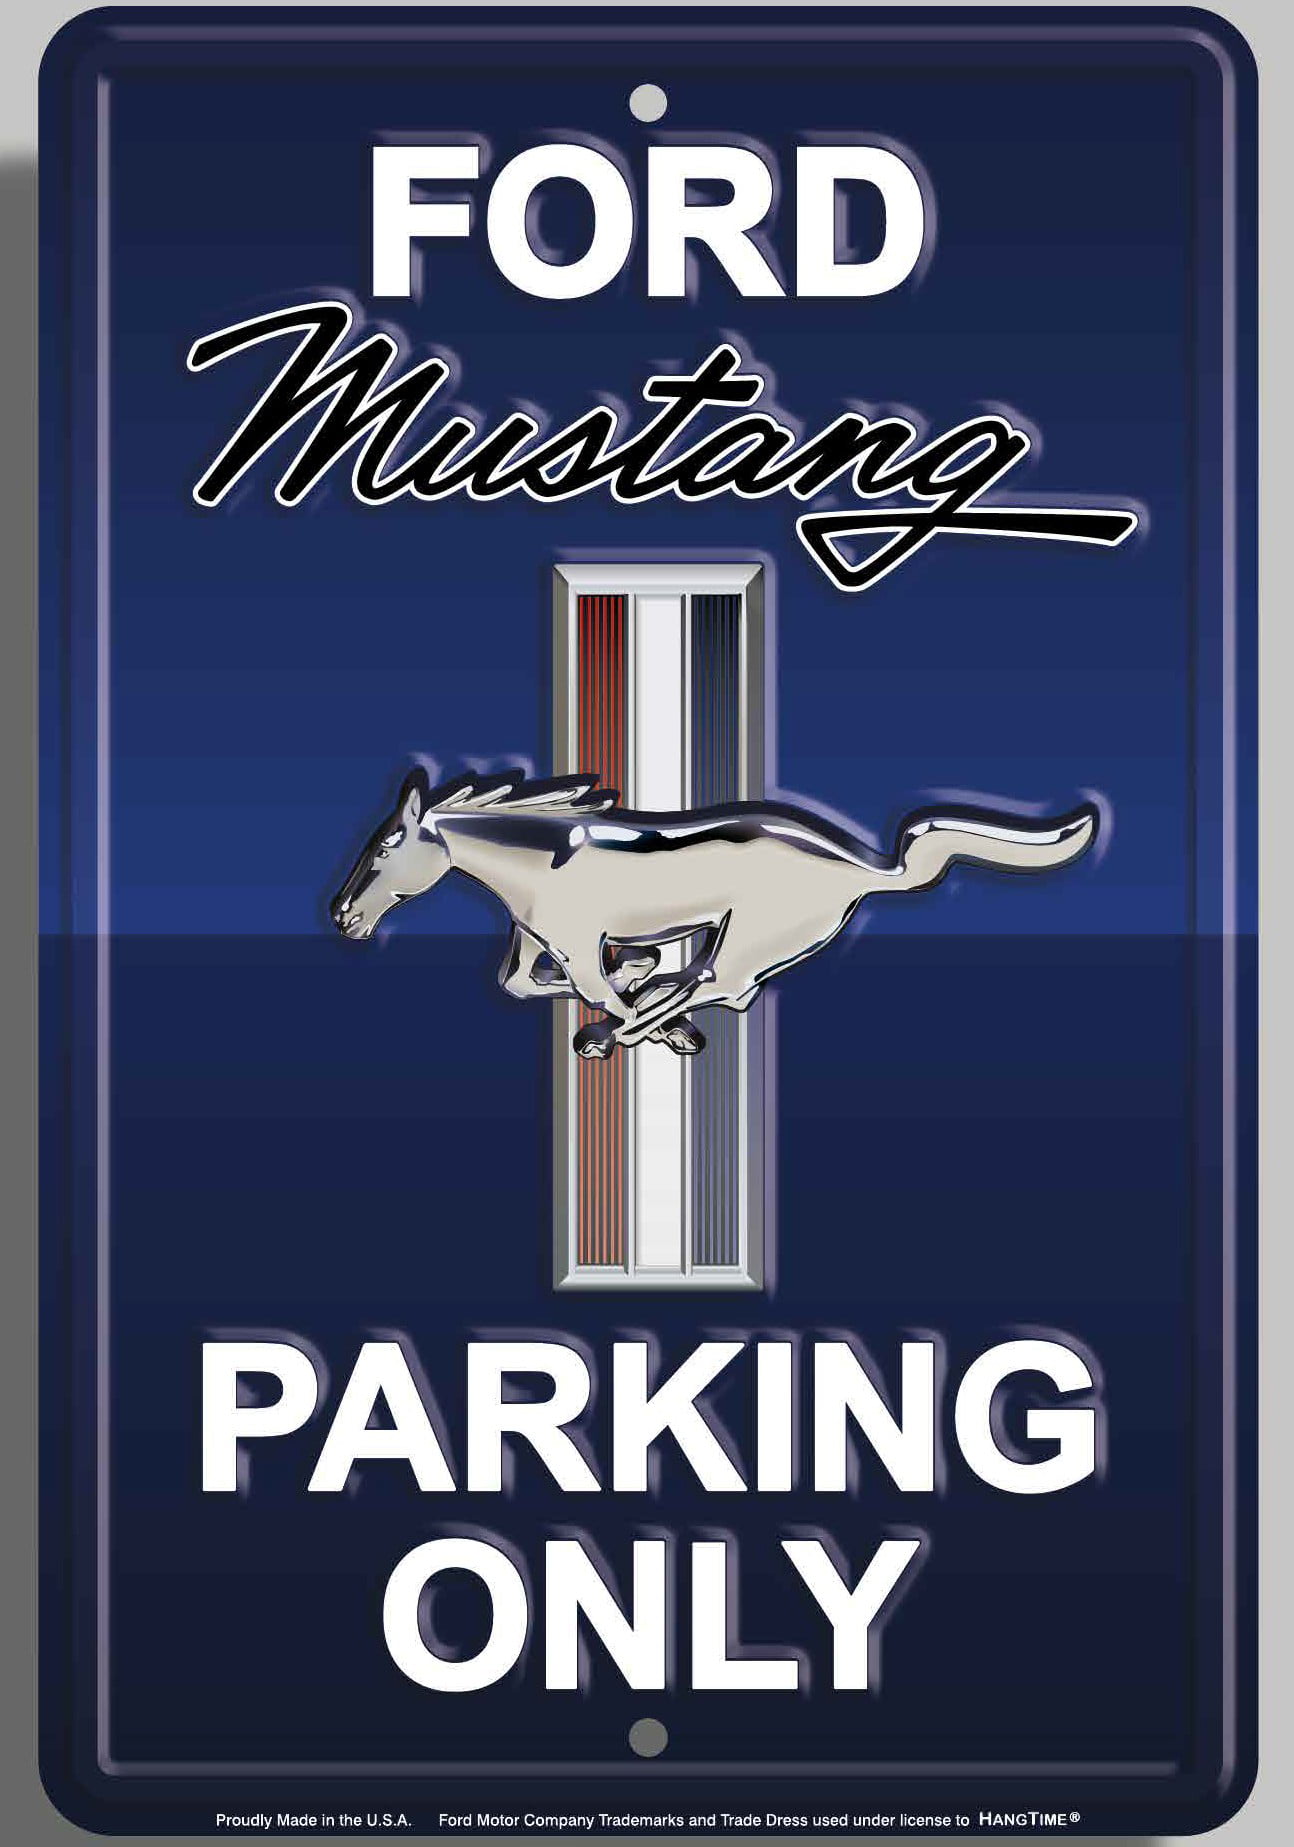 Details about   1983 83 Mustang Ford Novelty Reserved Parking Street Sign 9"X12" Aluminum 